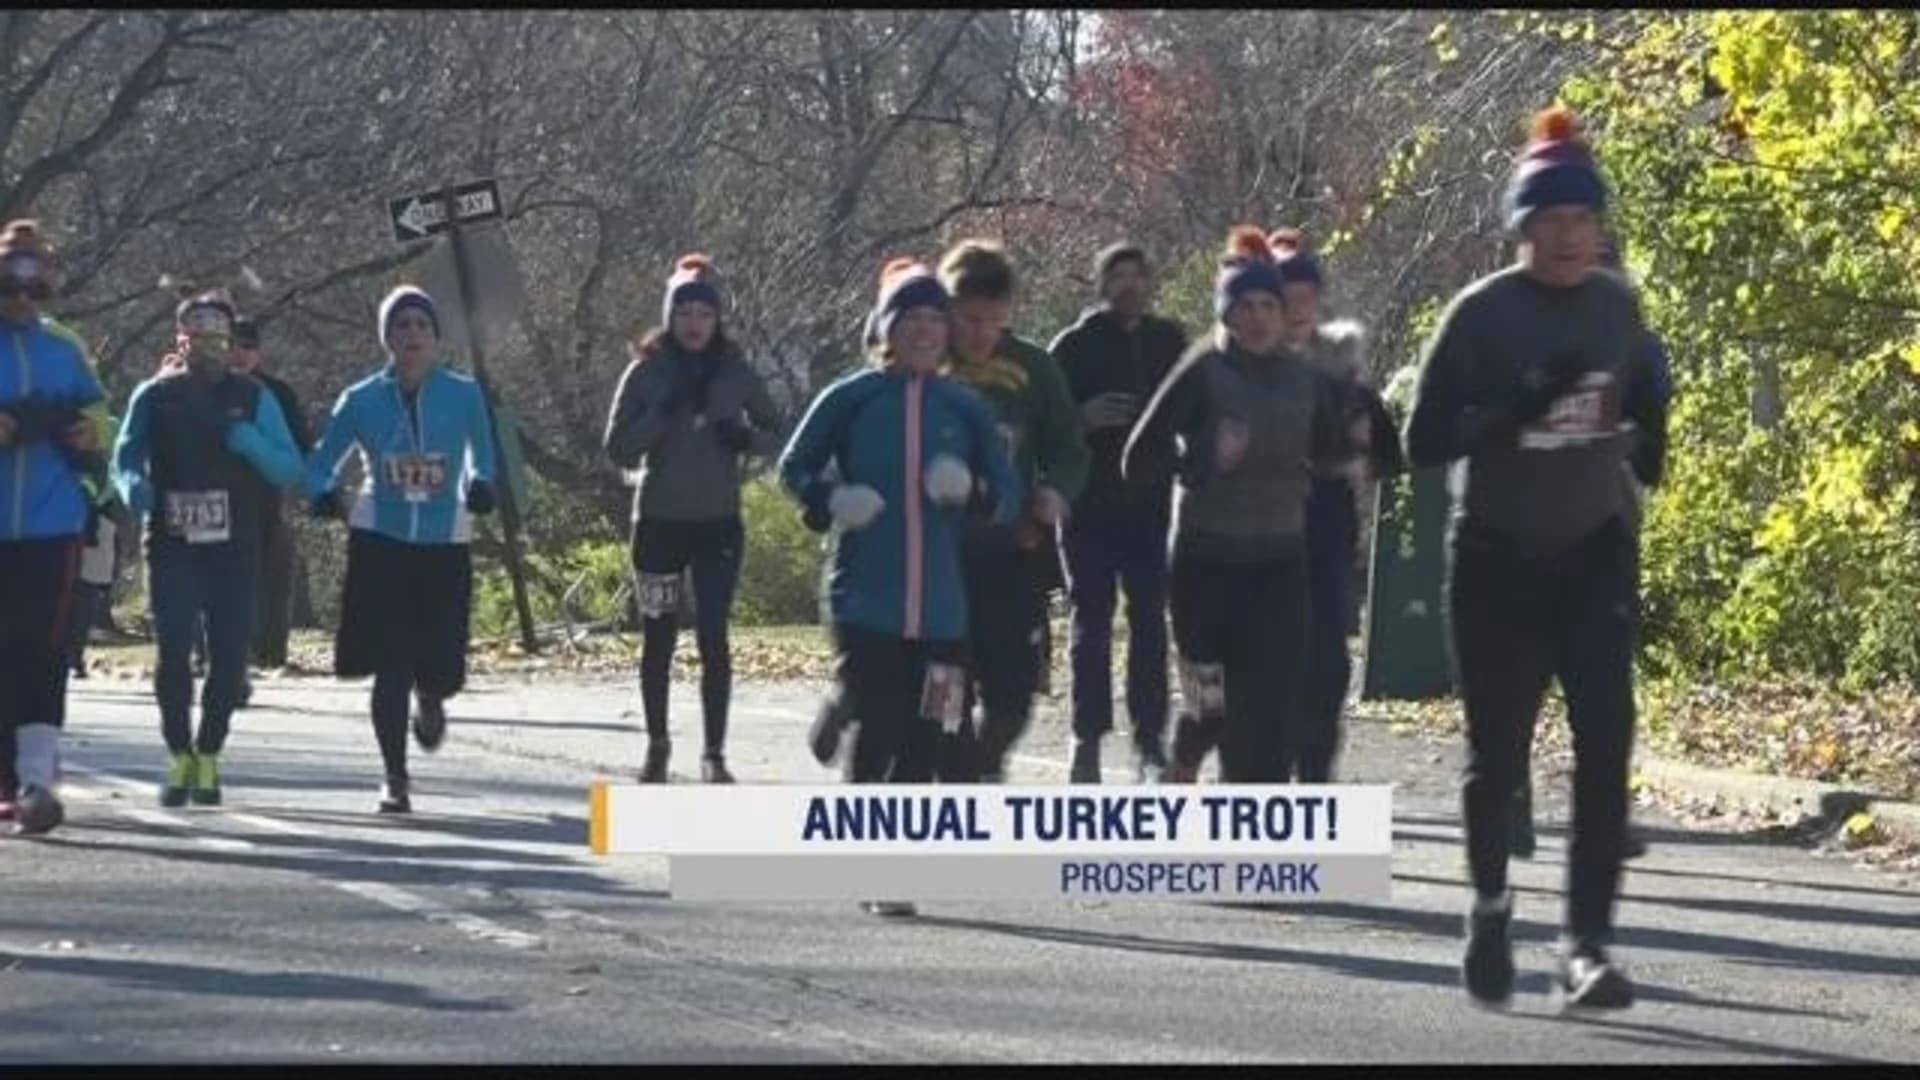 More than 2,800 runners participate in Turkey Trot in Prospect Park